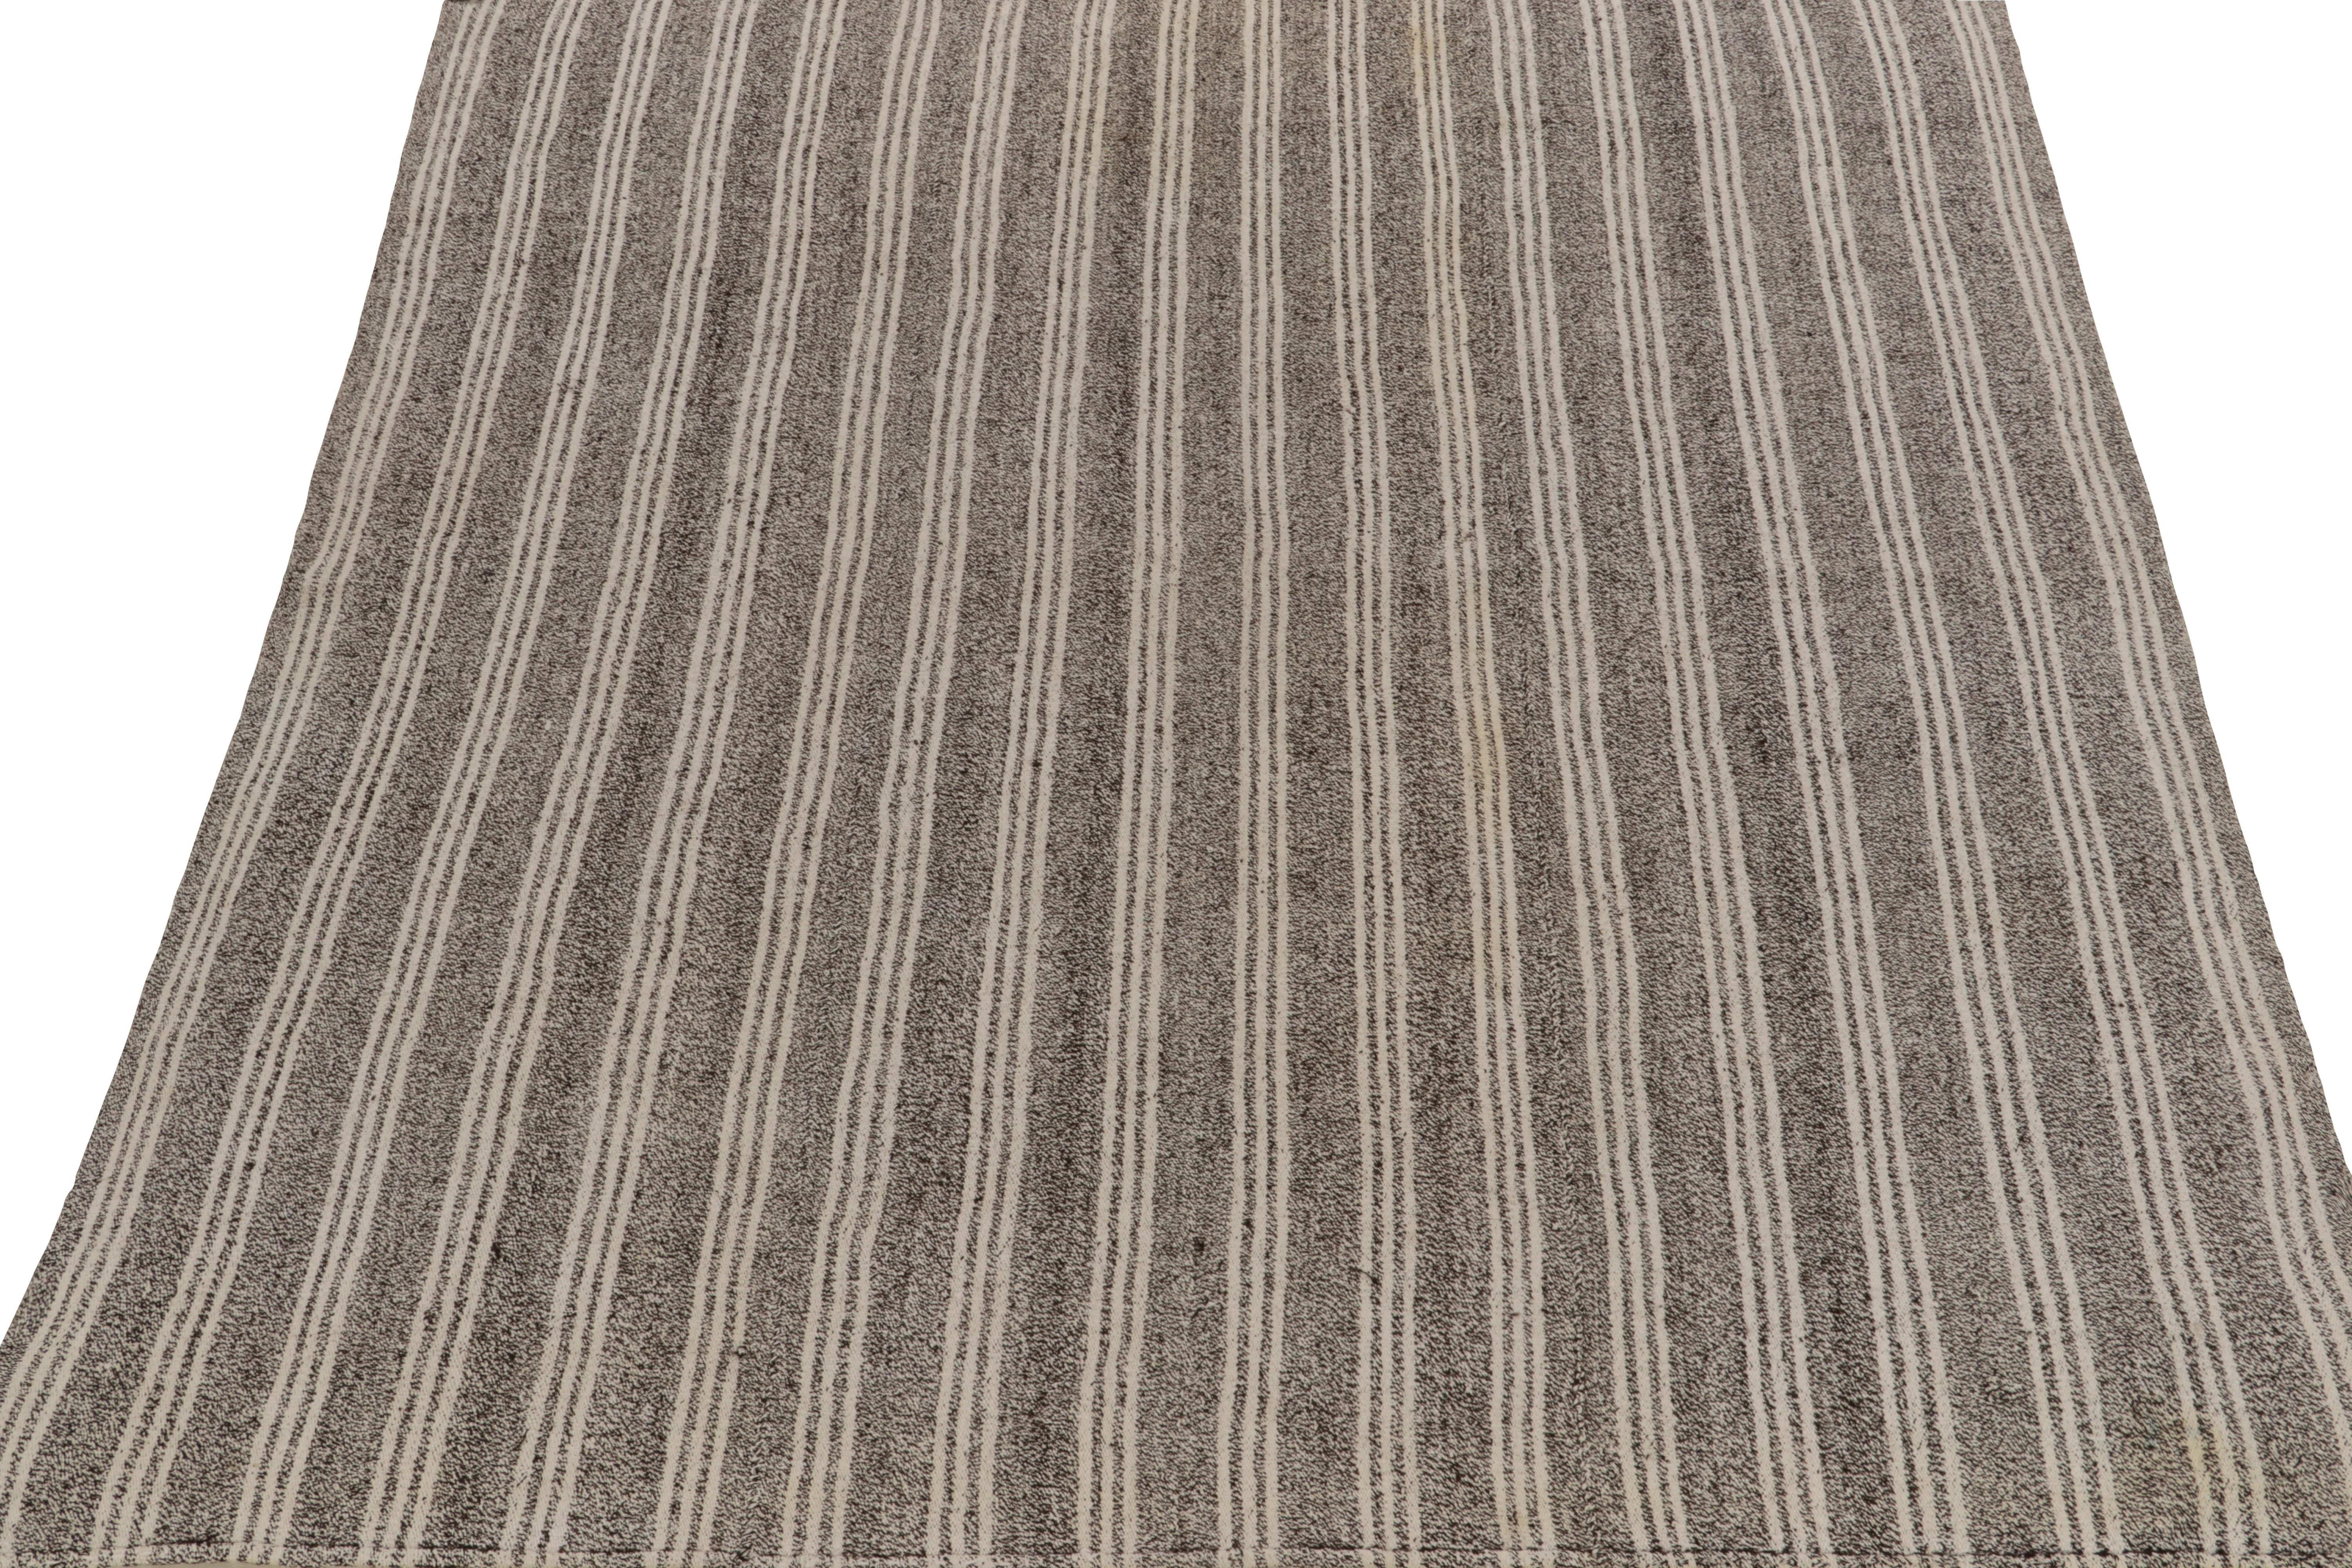 Turkish Vintage Striped Kilim in Gray Striations, Salt and Pepper Colors by Rug & Kilim For Sale